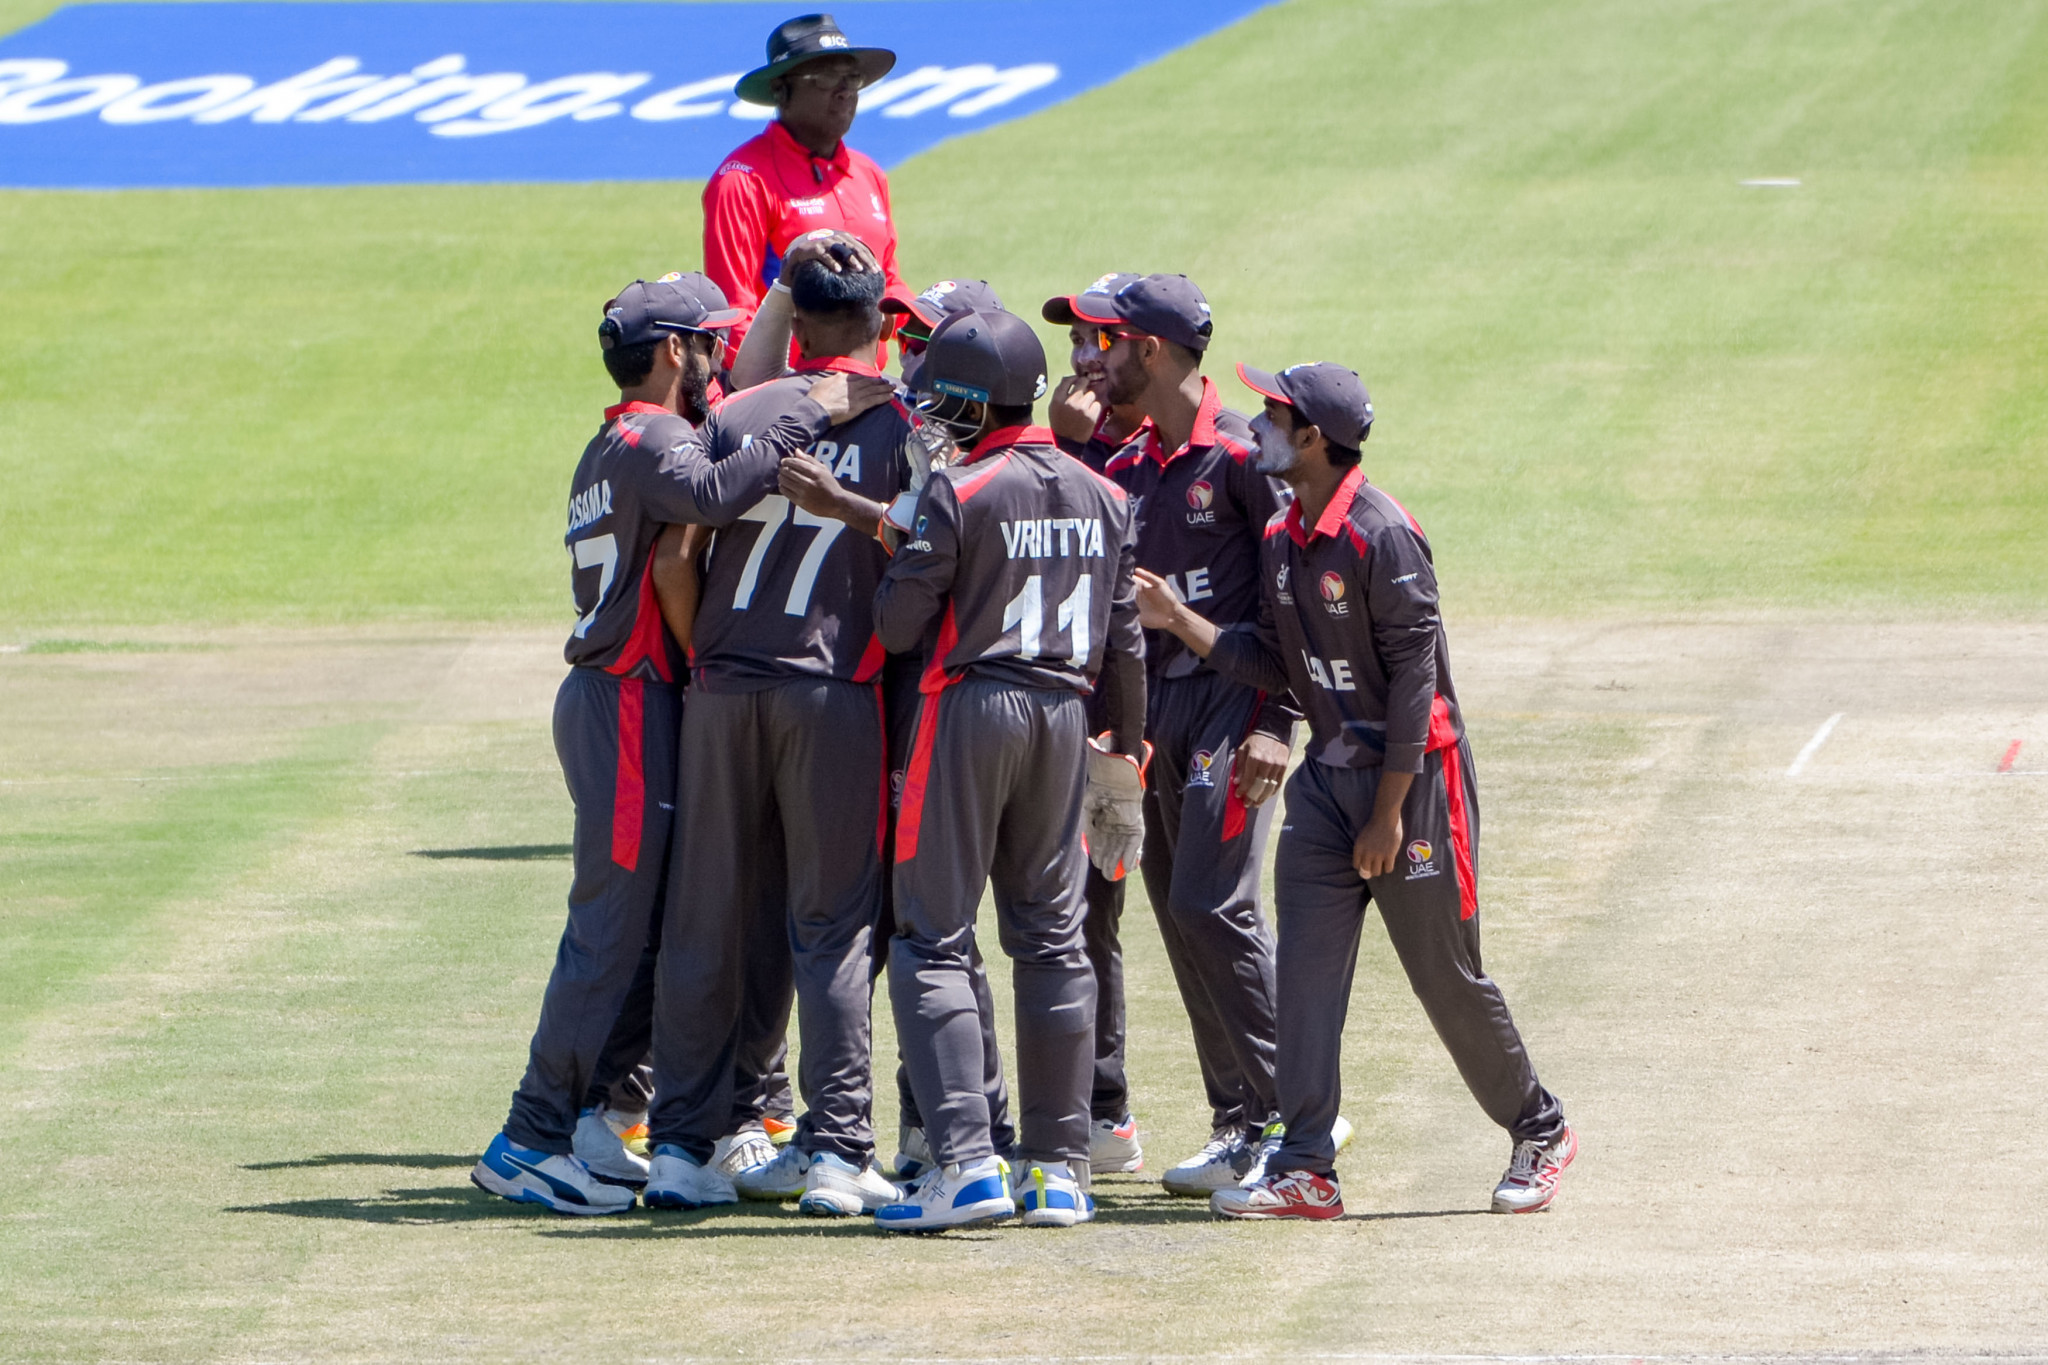 The United Arab Emirates just missed out on reaching the ICC Men's T20 World Cup after finishing in seventh place in the qualifying tournament in 2019 ©Getty Images